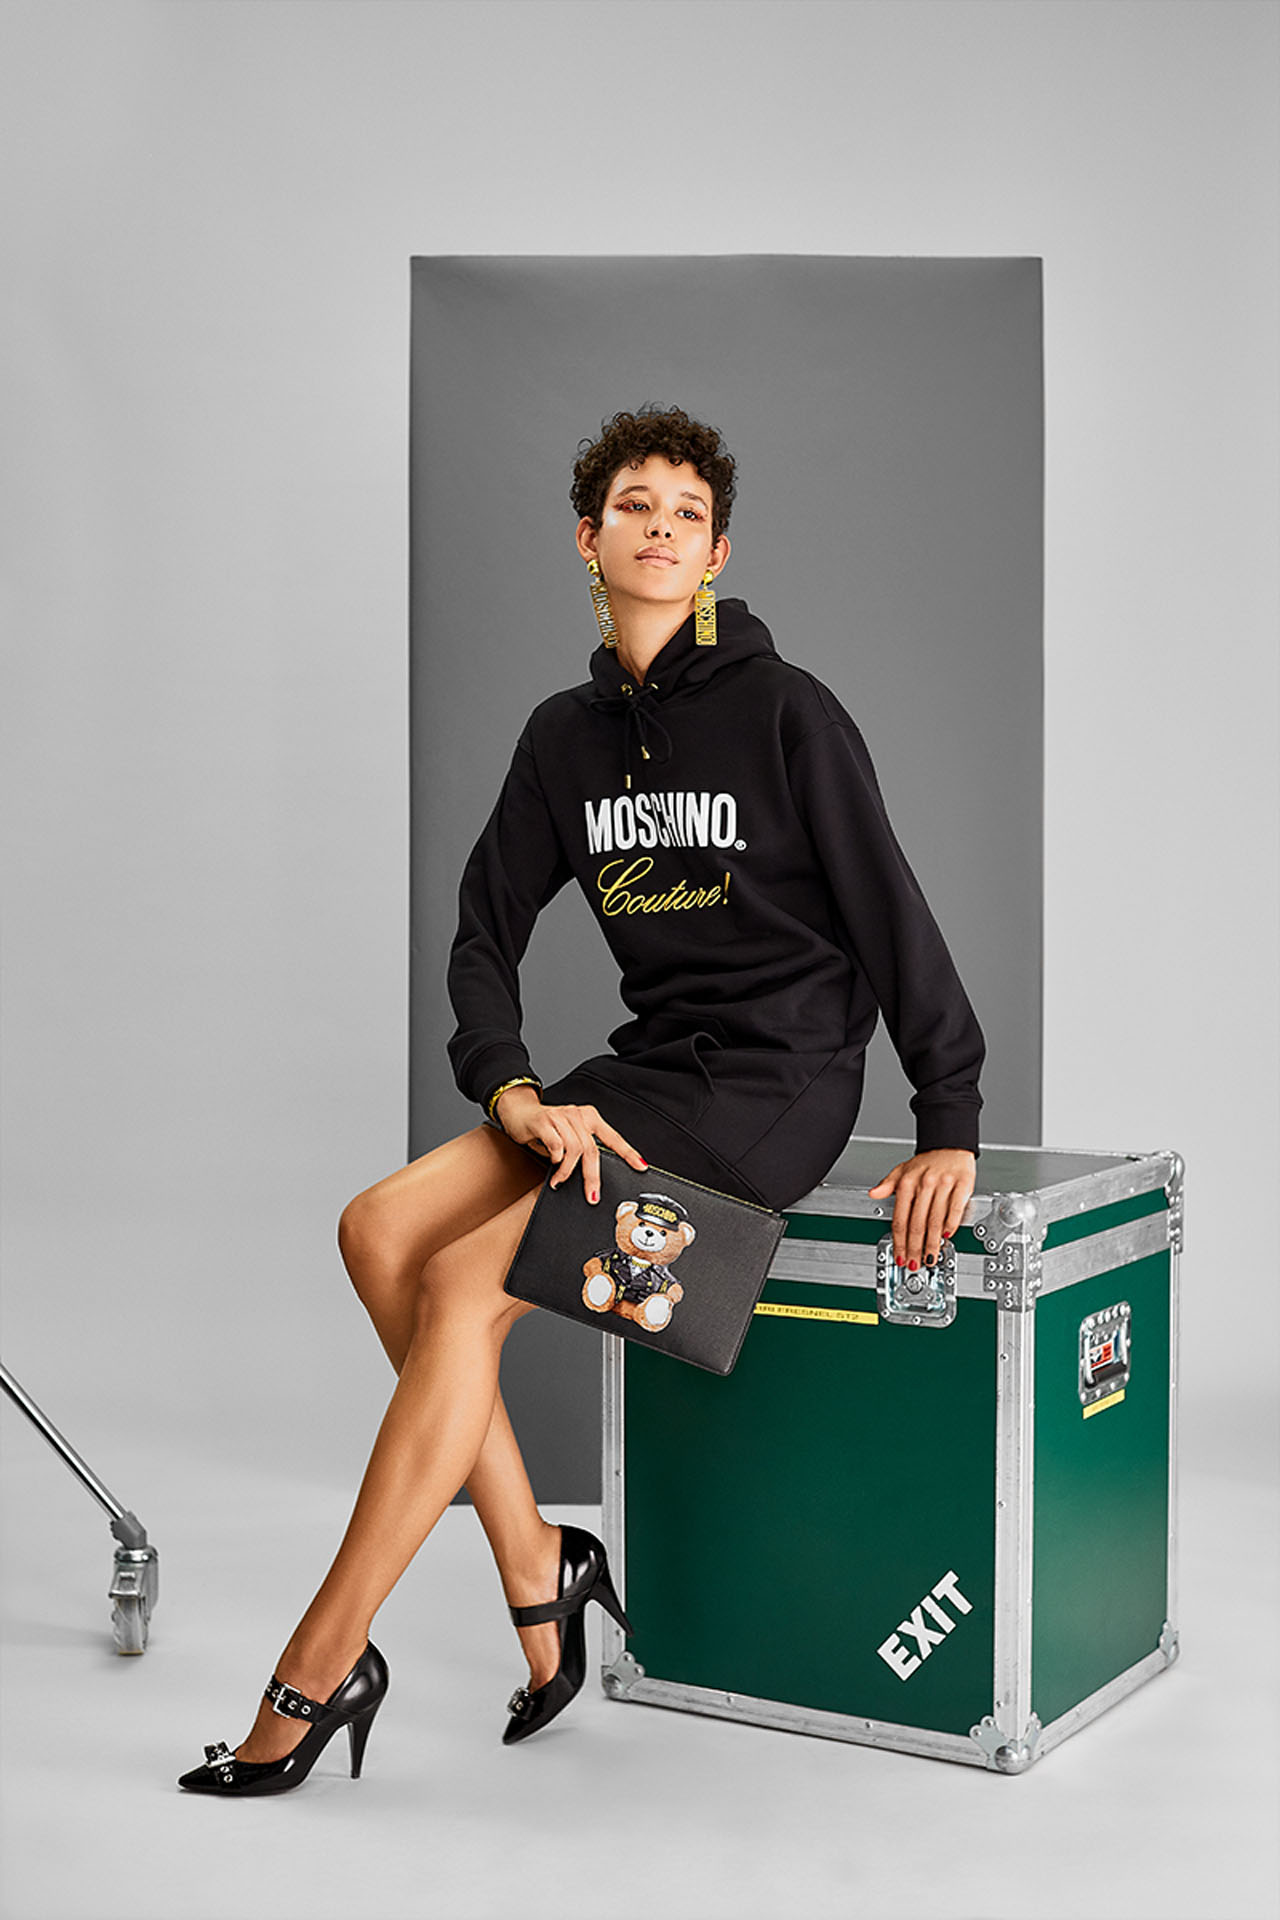 Dilone for Moschino Printemps 2018 by David Hatters